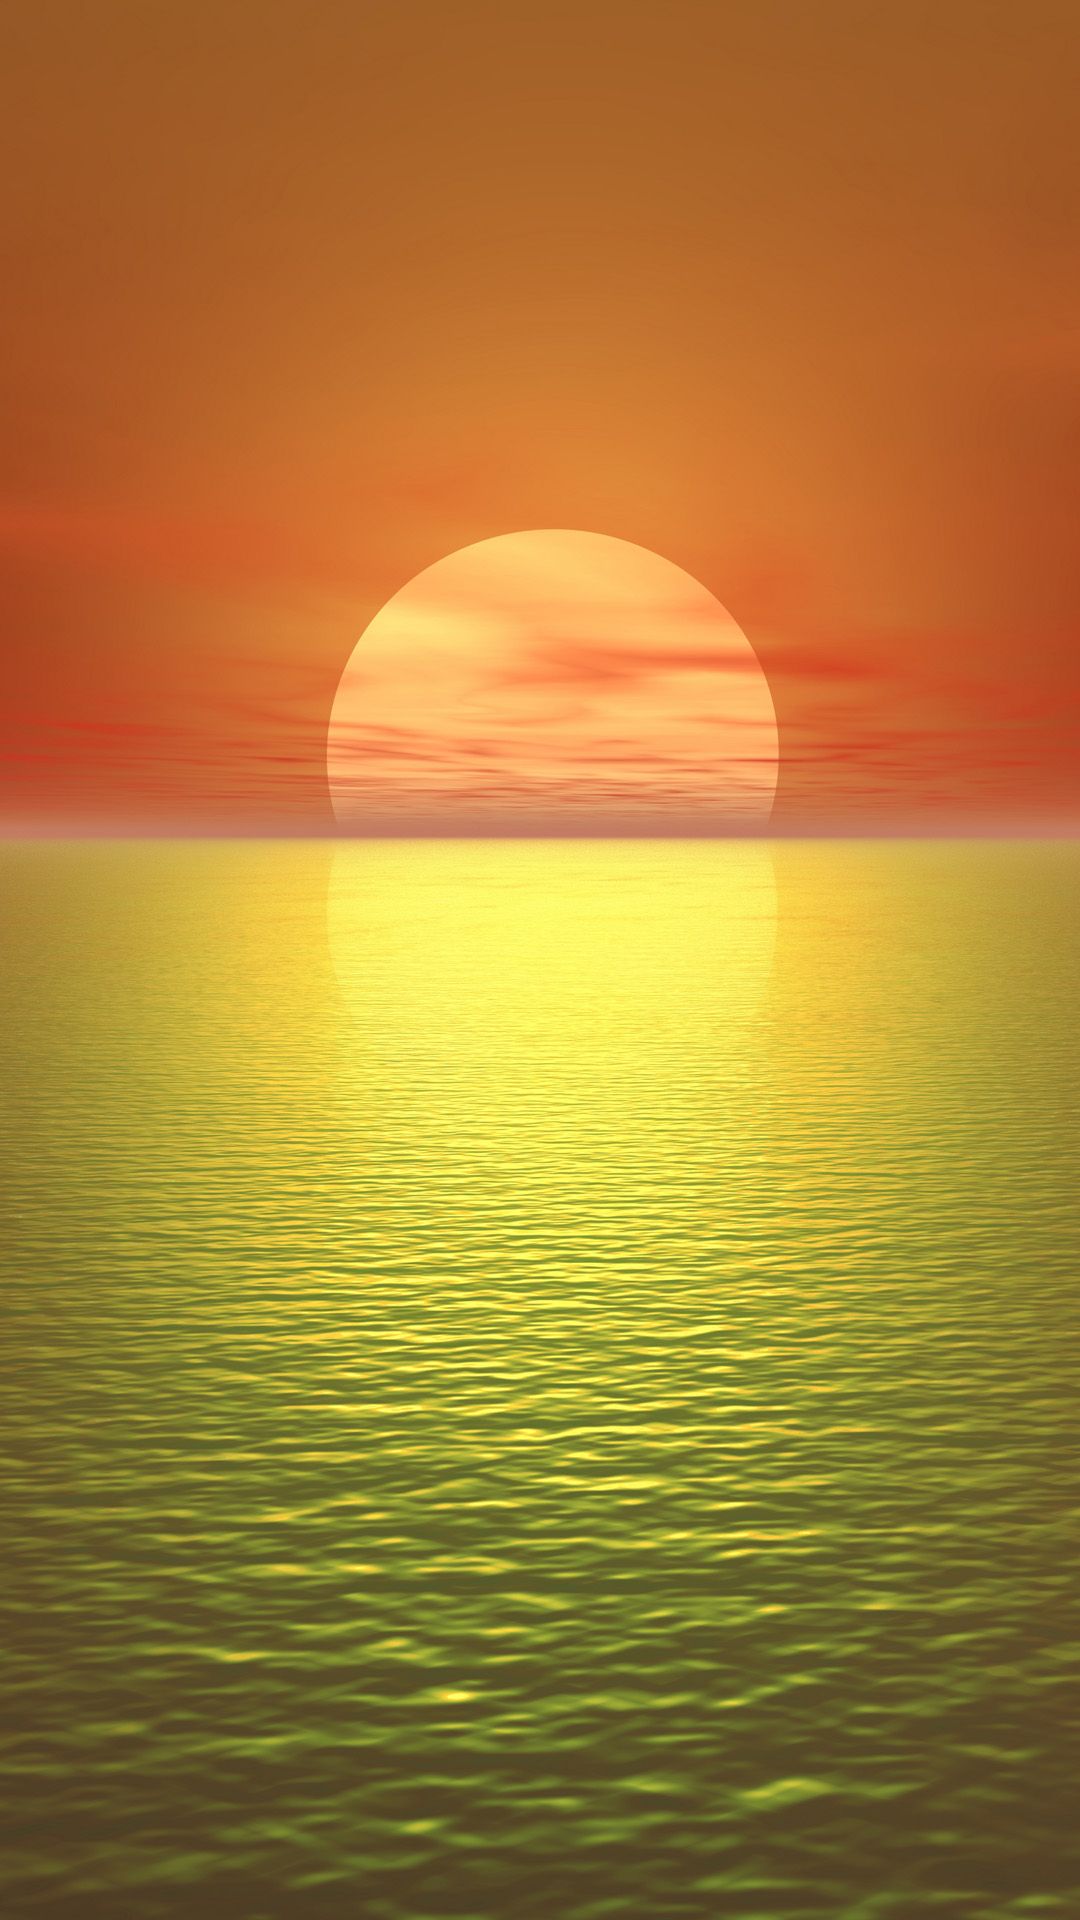 The most tranquil sunset iphone wallpaper download iphone wallpapers ipad wallpapers one